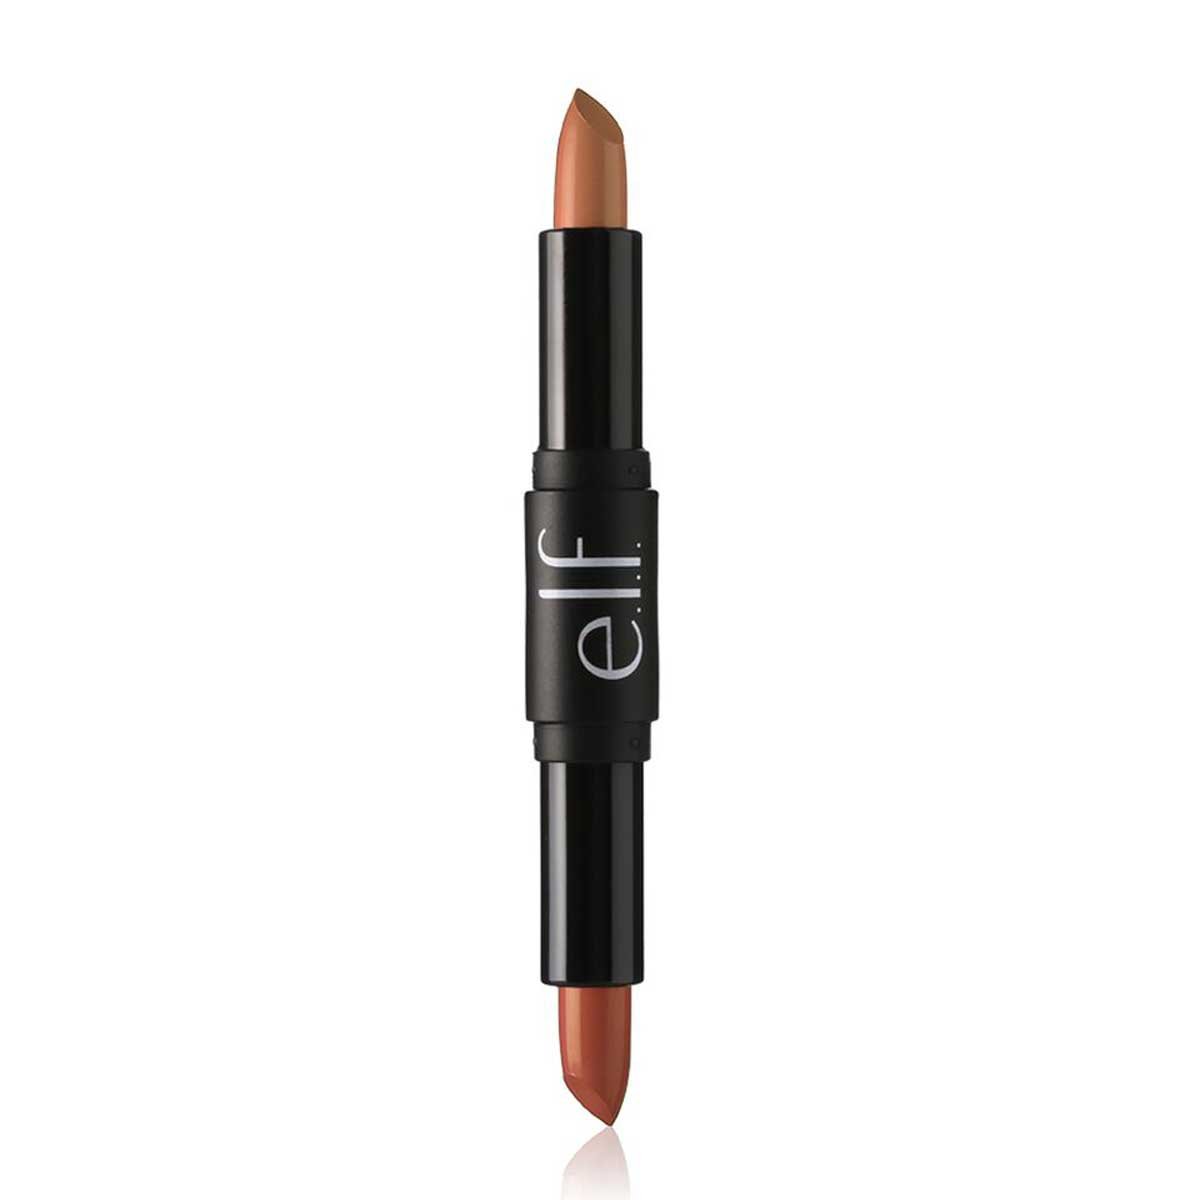 Labial Bicolor Day To Night - Need It Nudes Elf